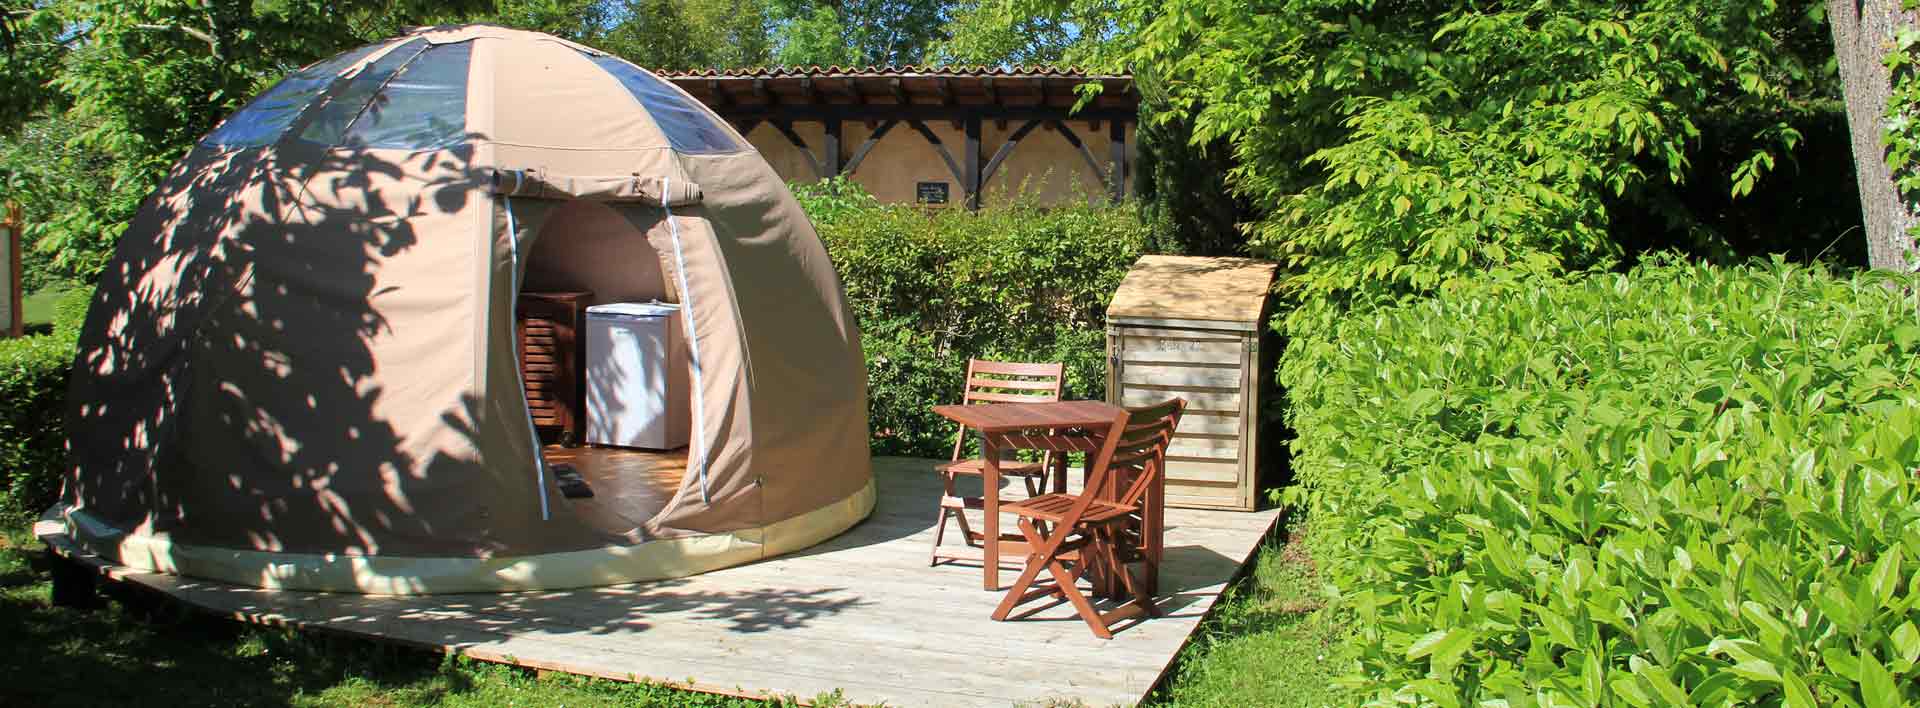 Unusual holiday rentals weekend toulouse occitanie